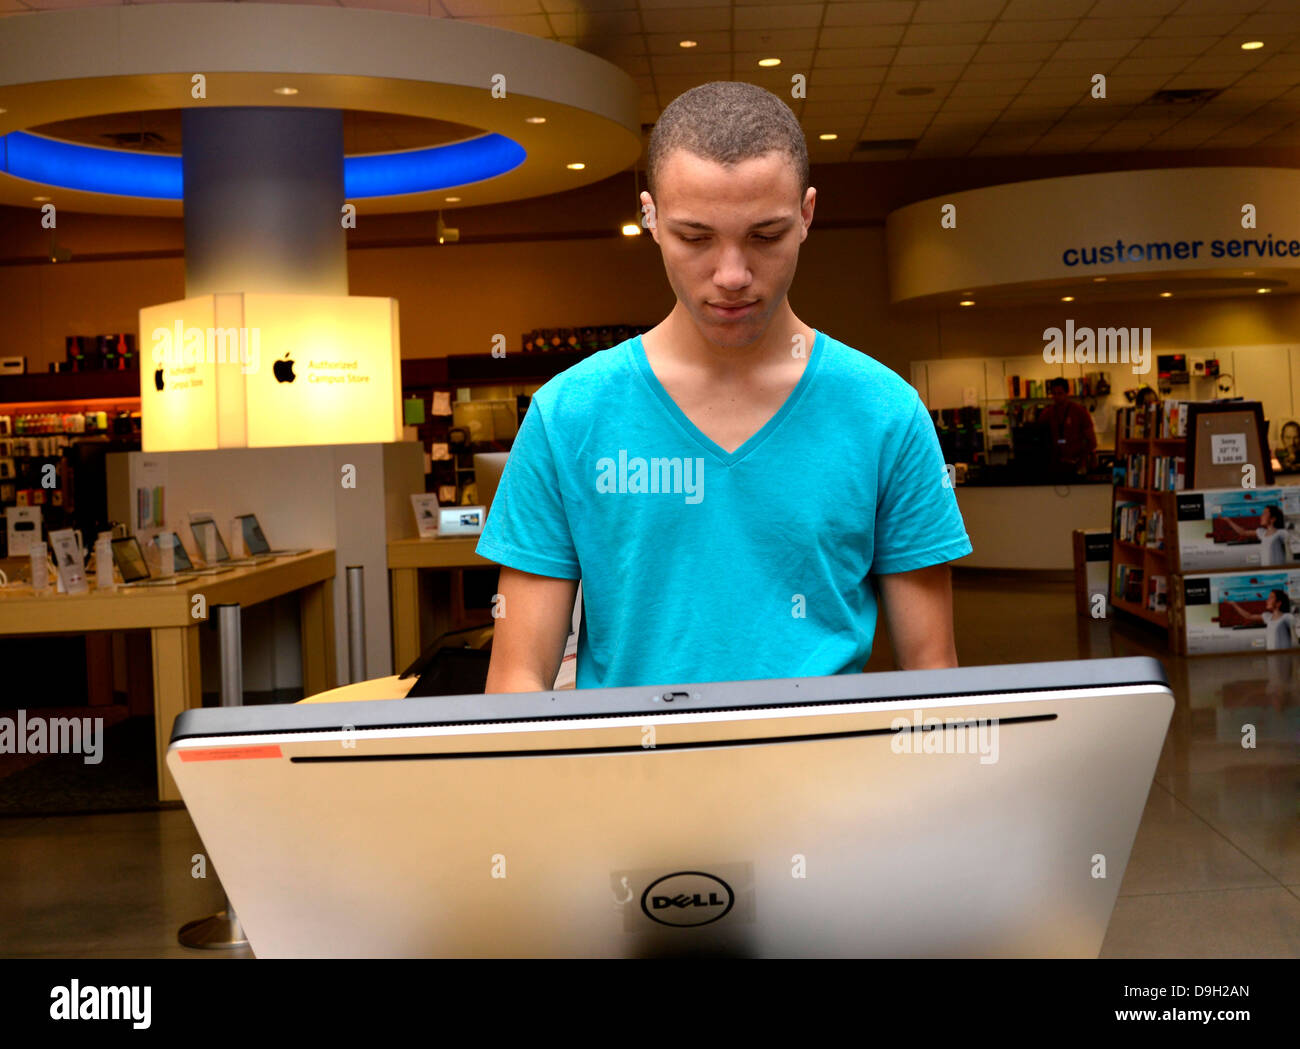 A young man looks at computers in a campus bookstore. Stock Photo